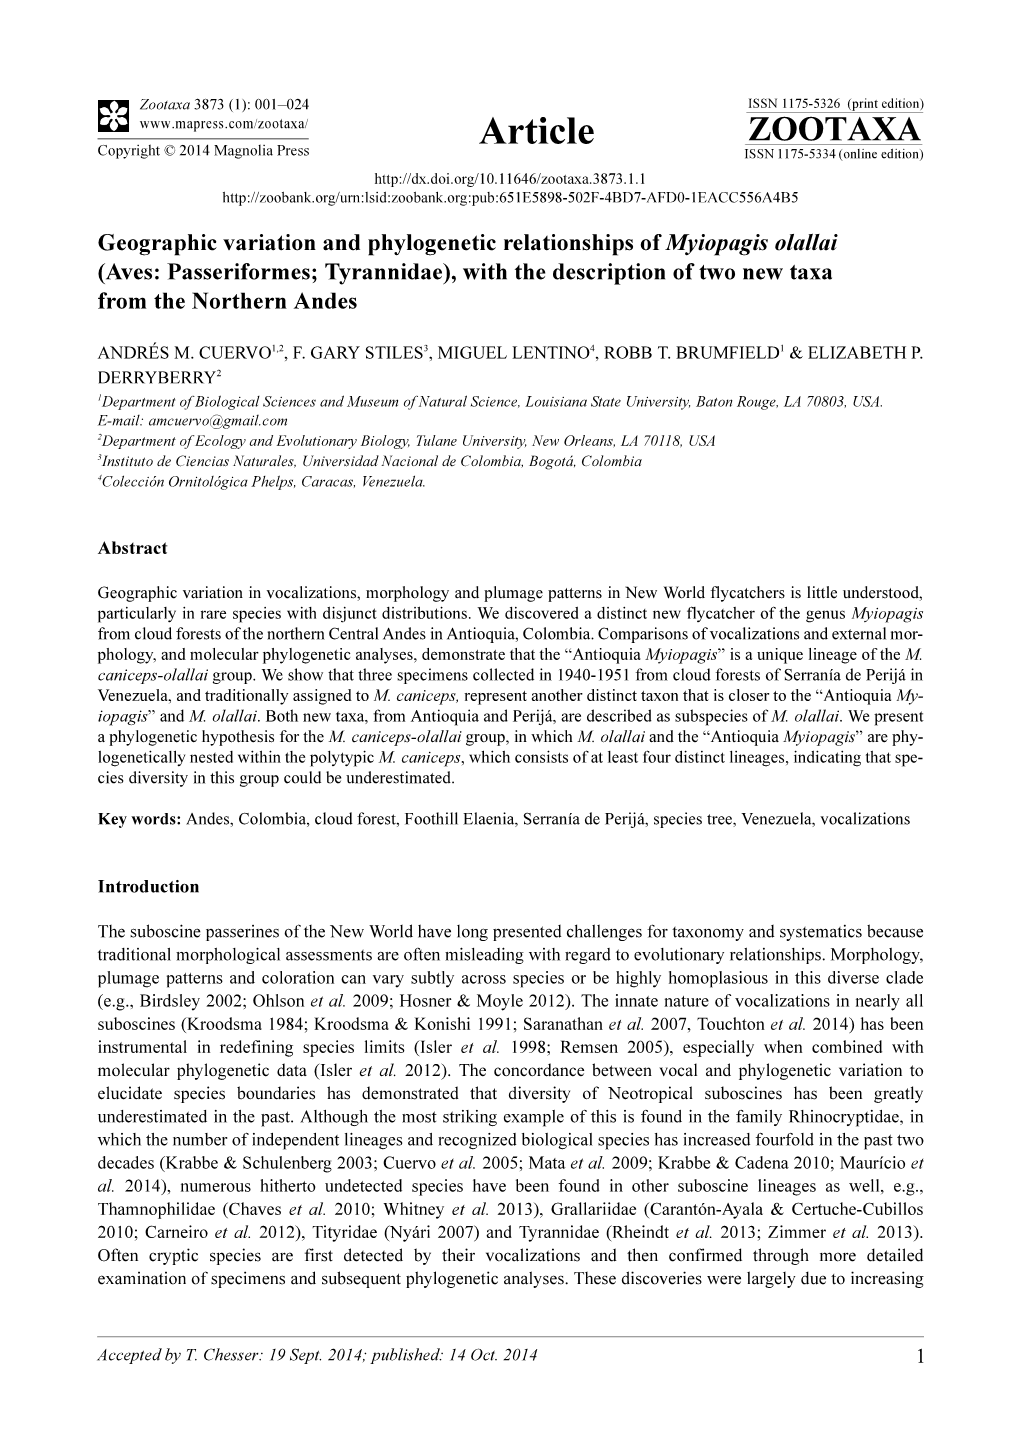 Geographic Variation and Phylogenetic Relationships of Myiopagis Olallai